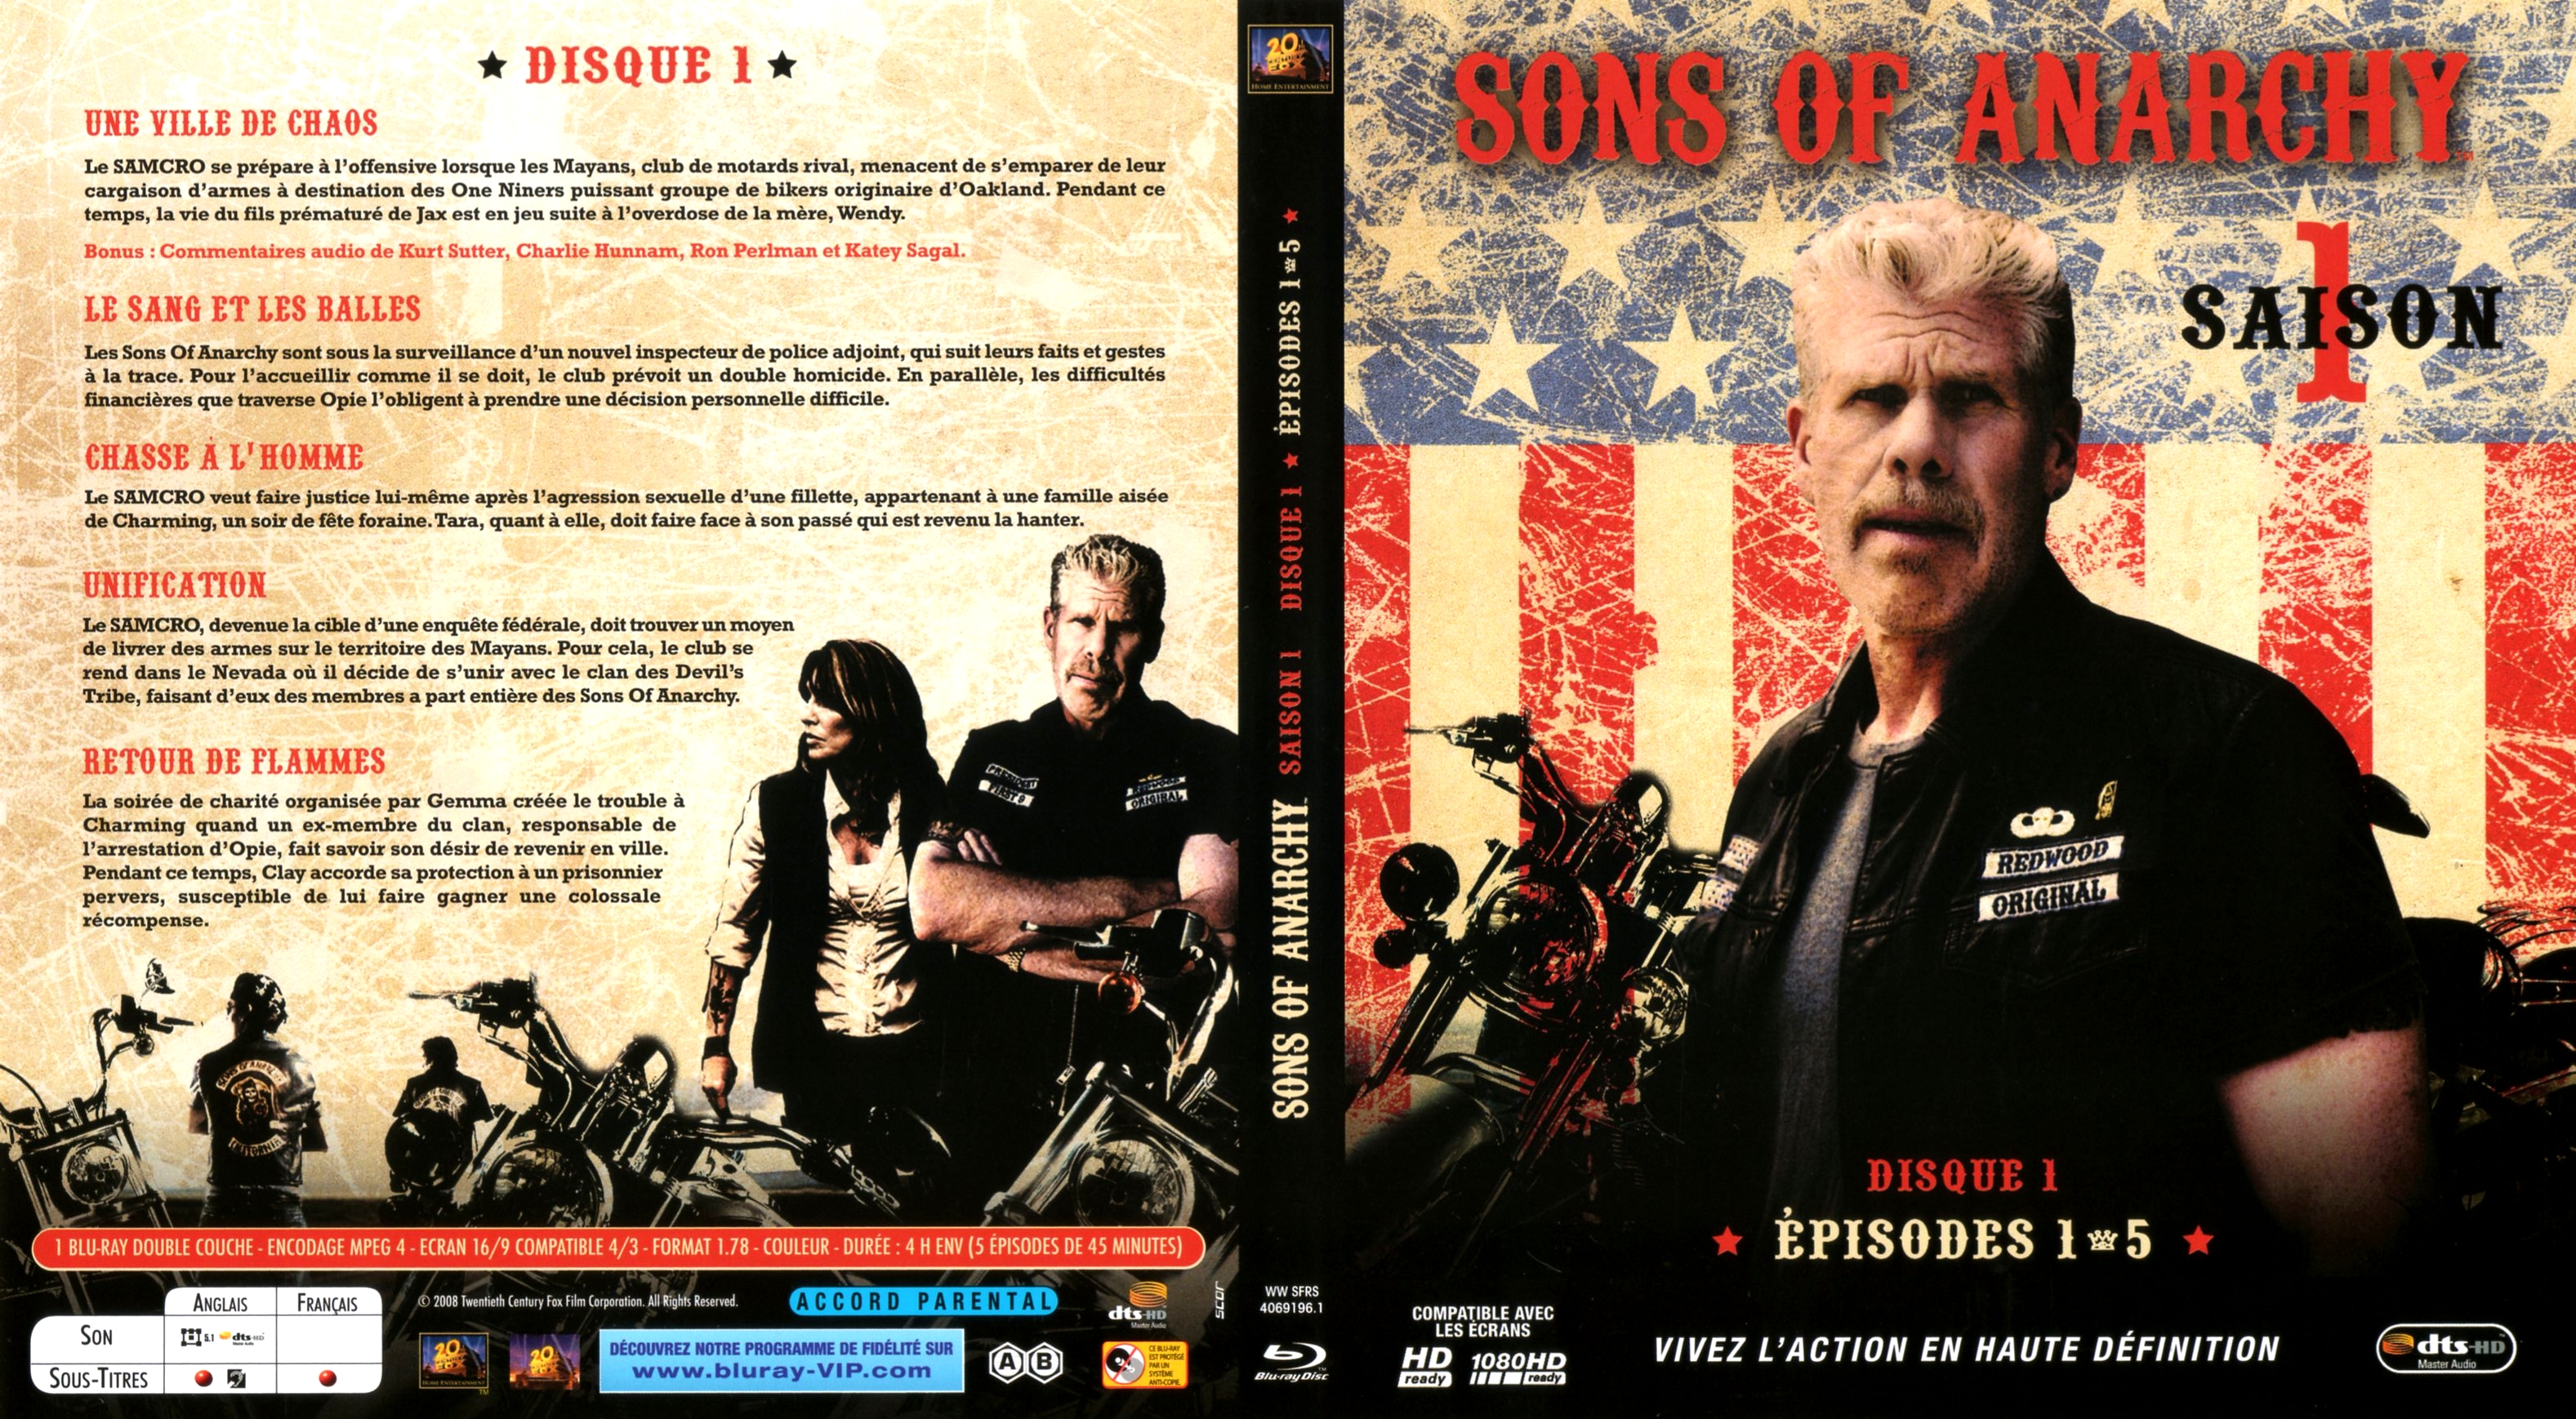 Jaquette DVD Sons of anarchy Saison 1 DISC 1 (BLU-RAY)